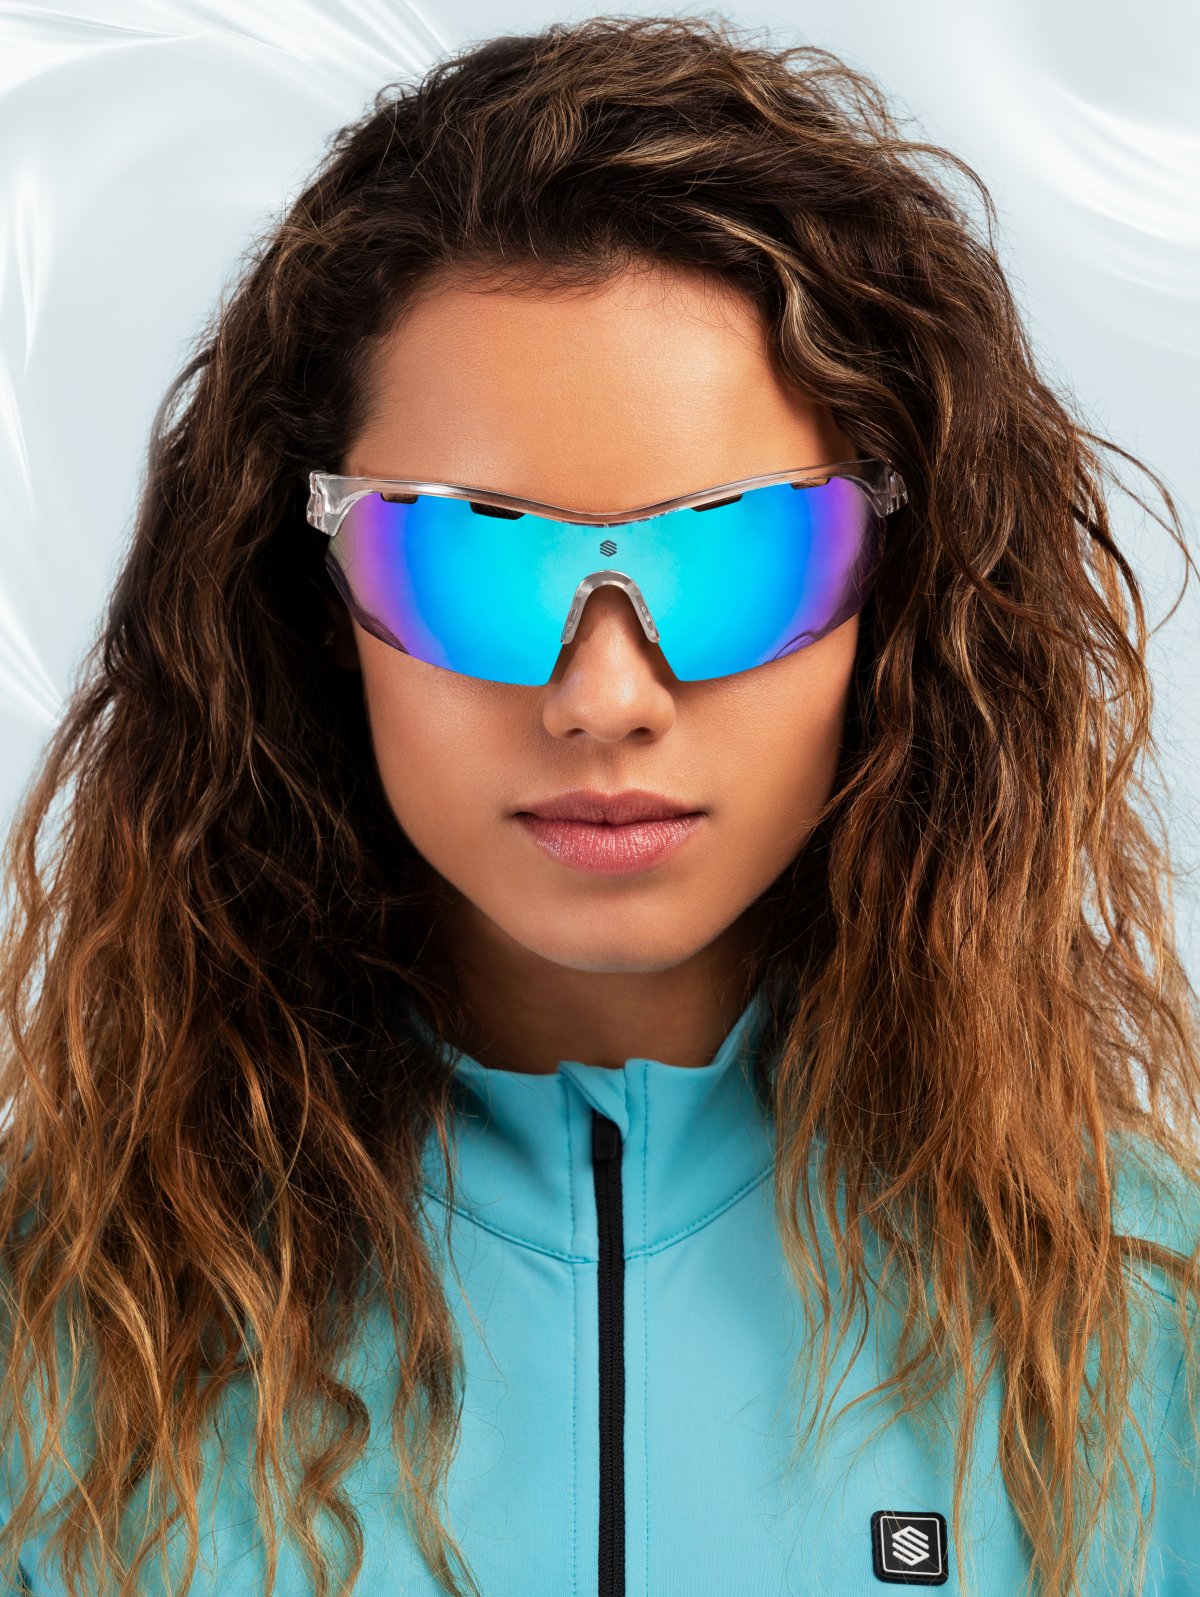 WOMEN'S SPORT SUNGLASSES FOR RUNNING AND CYCLING | SIROKO